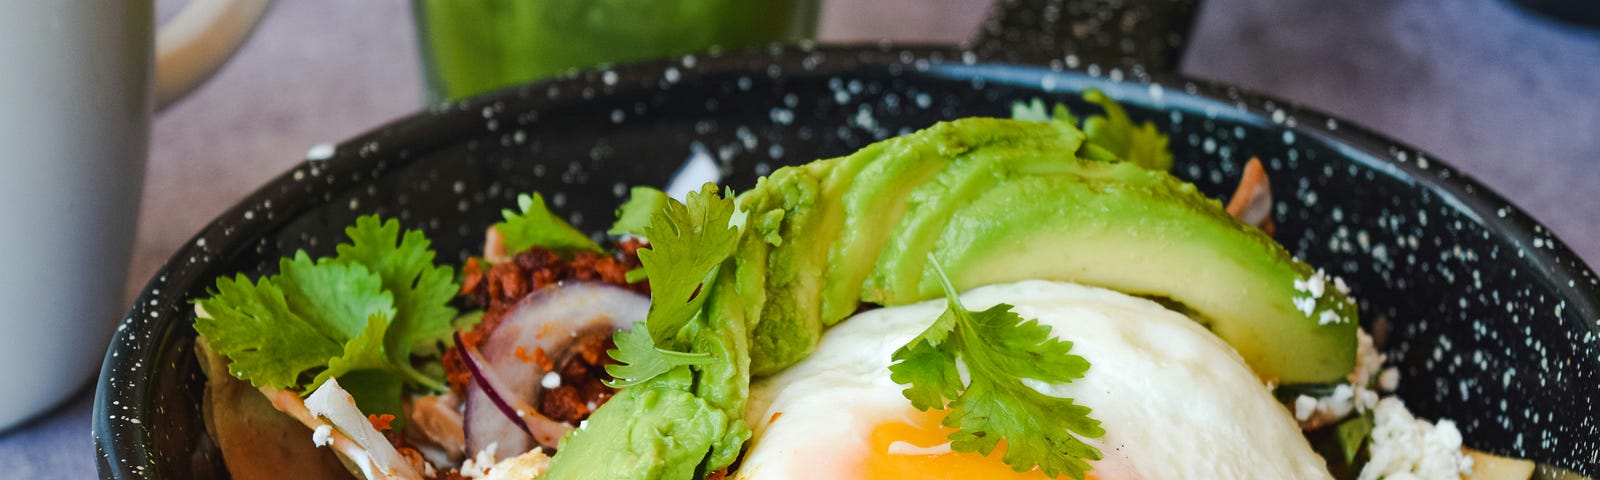 A bowl of tempting avocado slices, cotija cheese, and cilantro topped with a soft-poached egg.